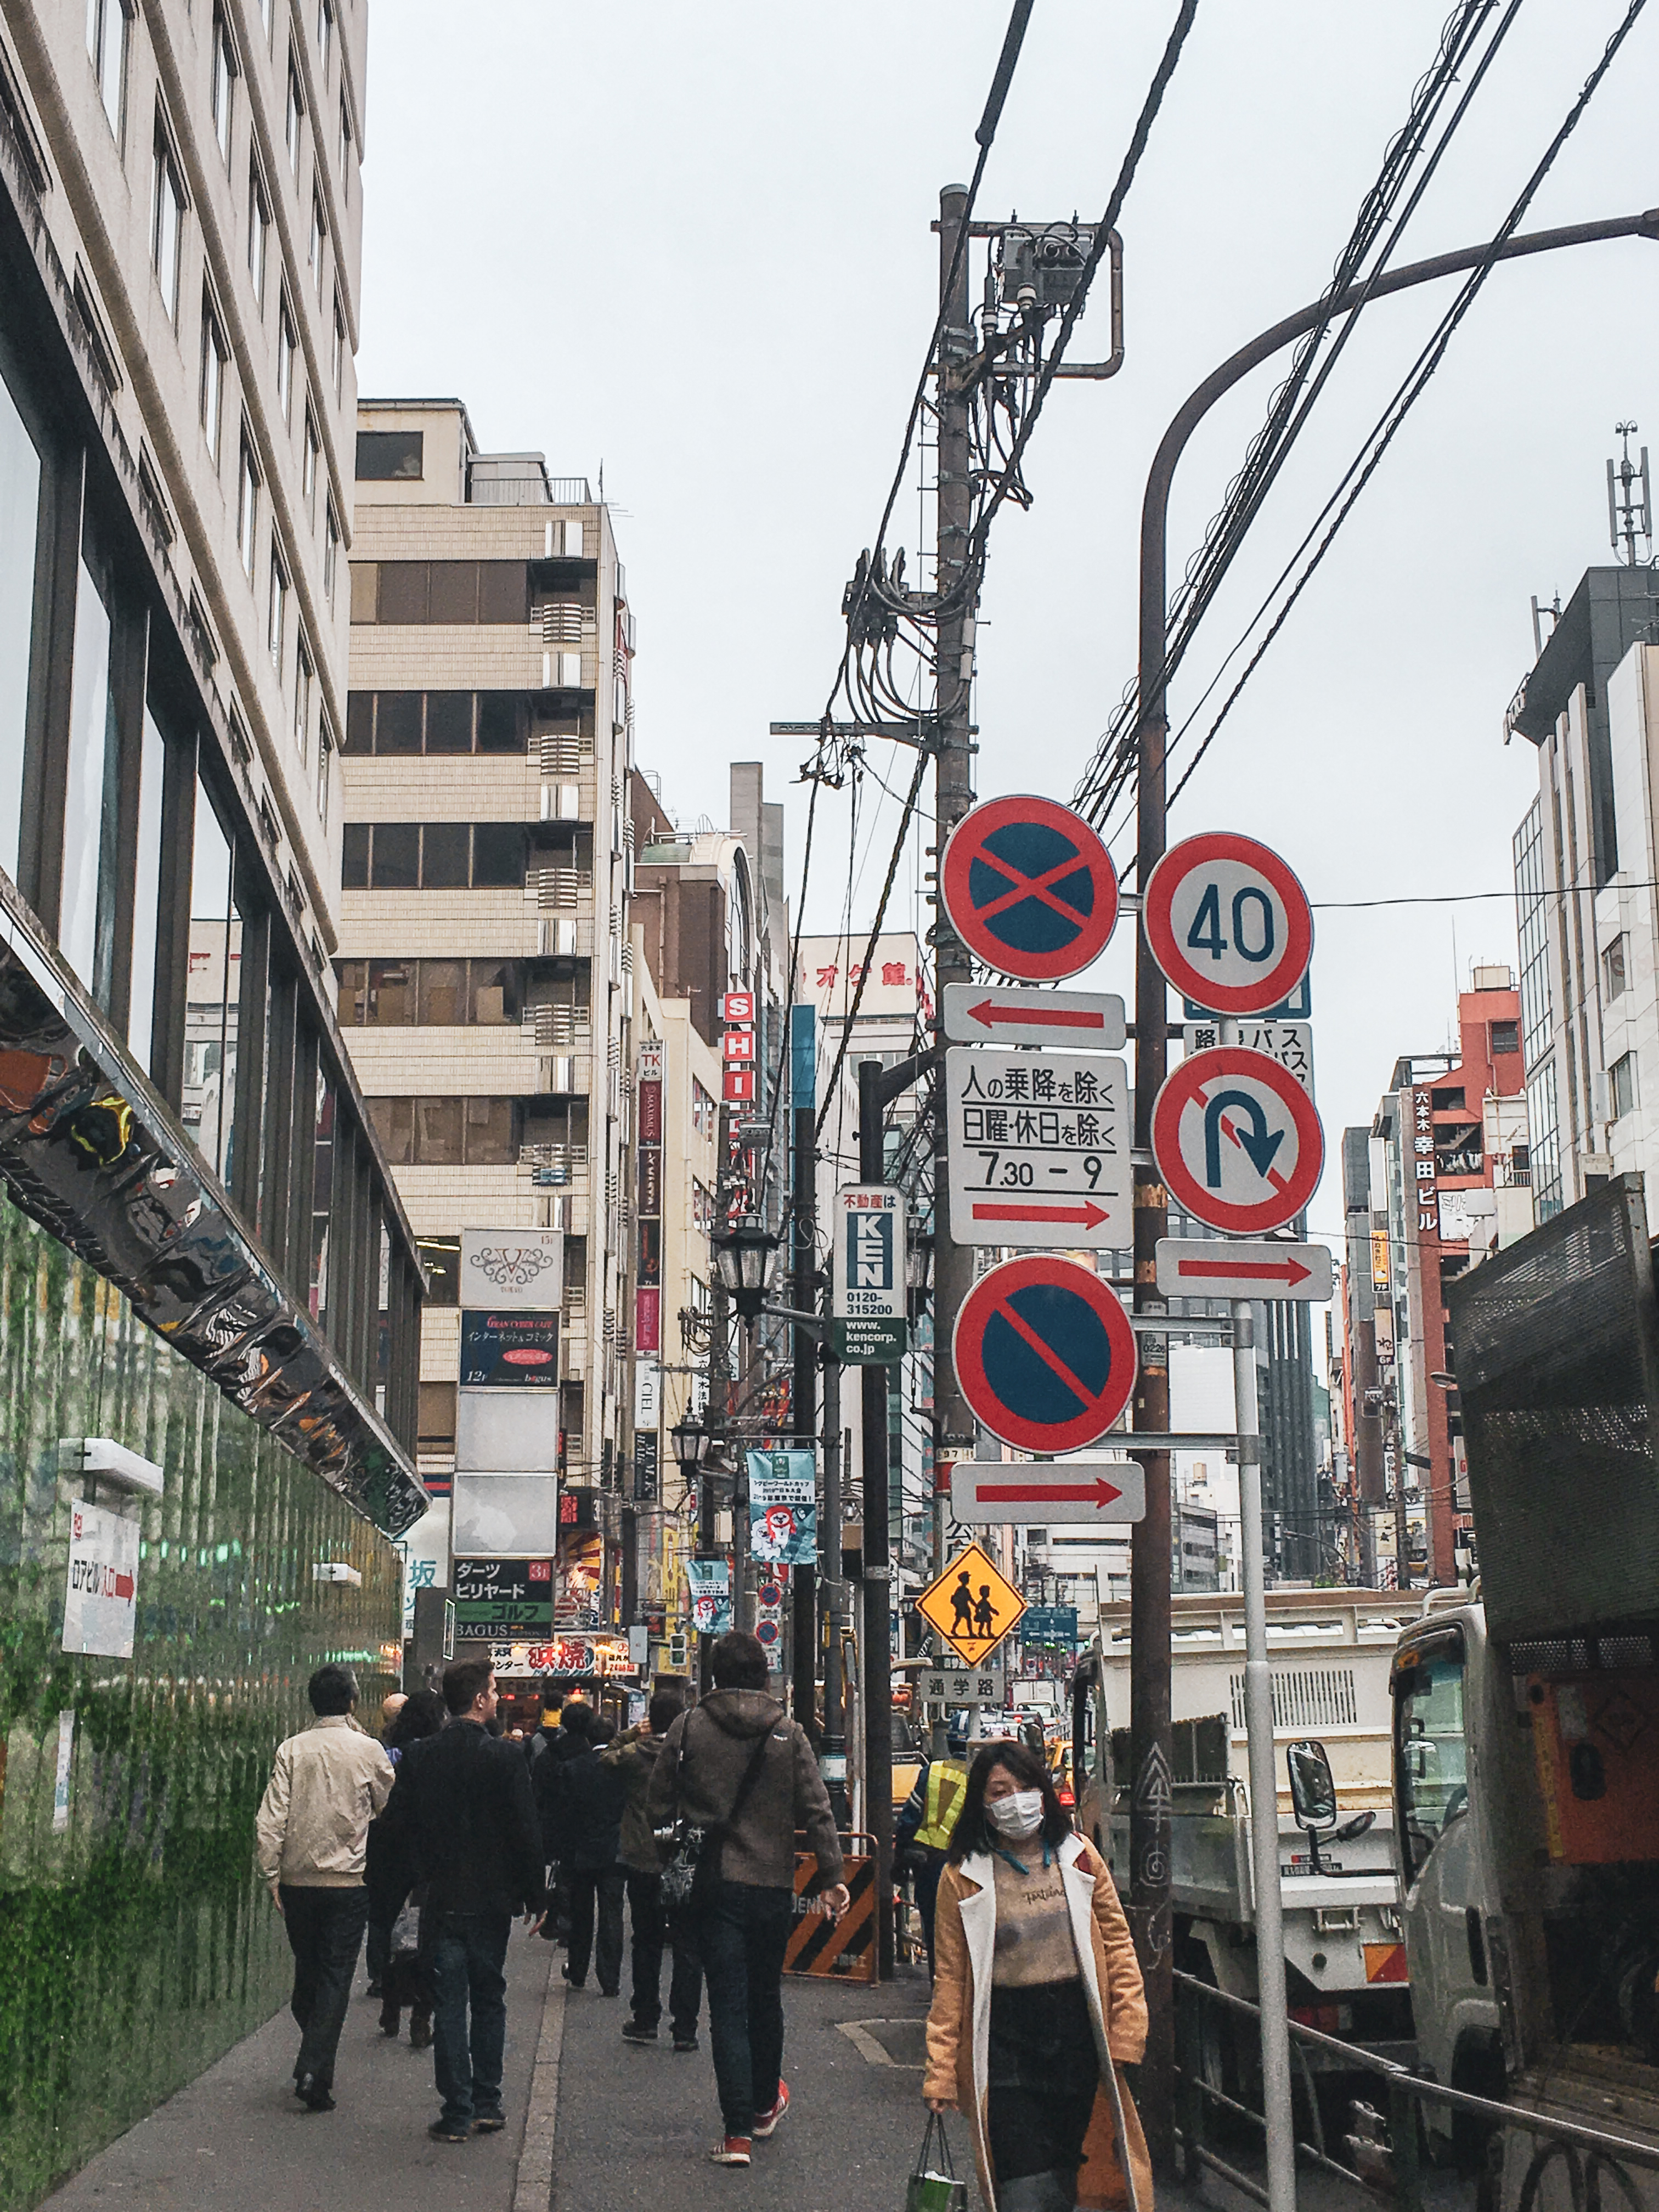 Roppongi and its clutter